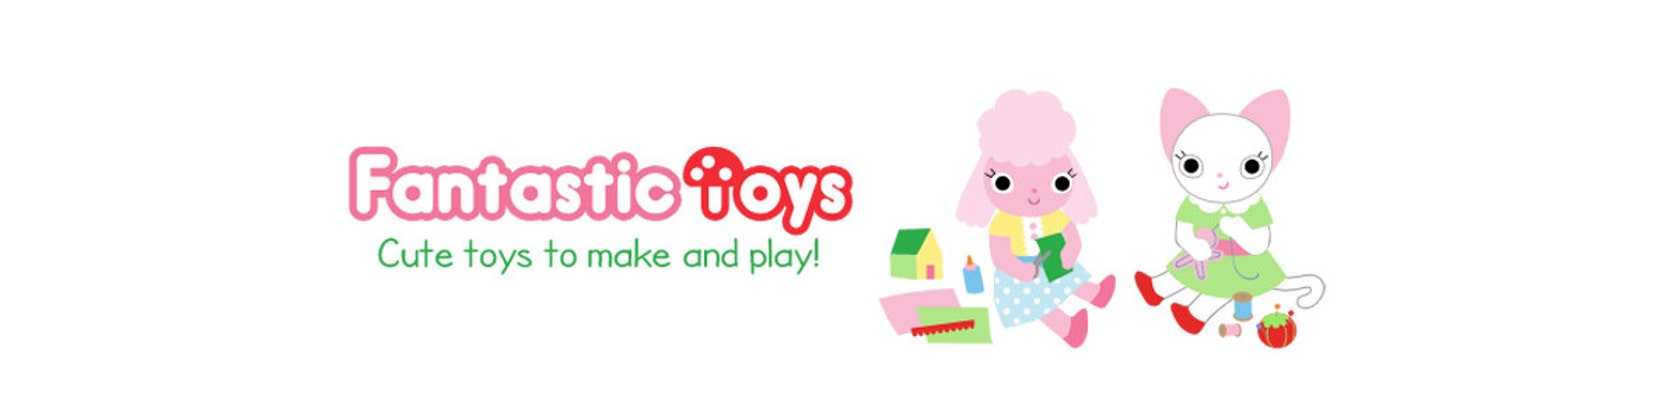 fantastic toys and dolls